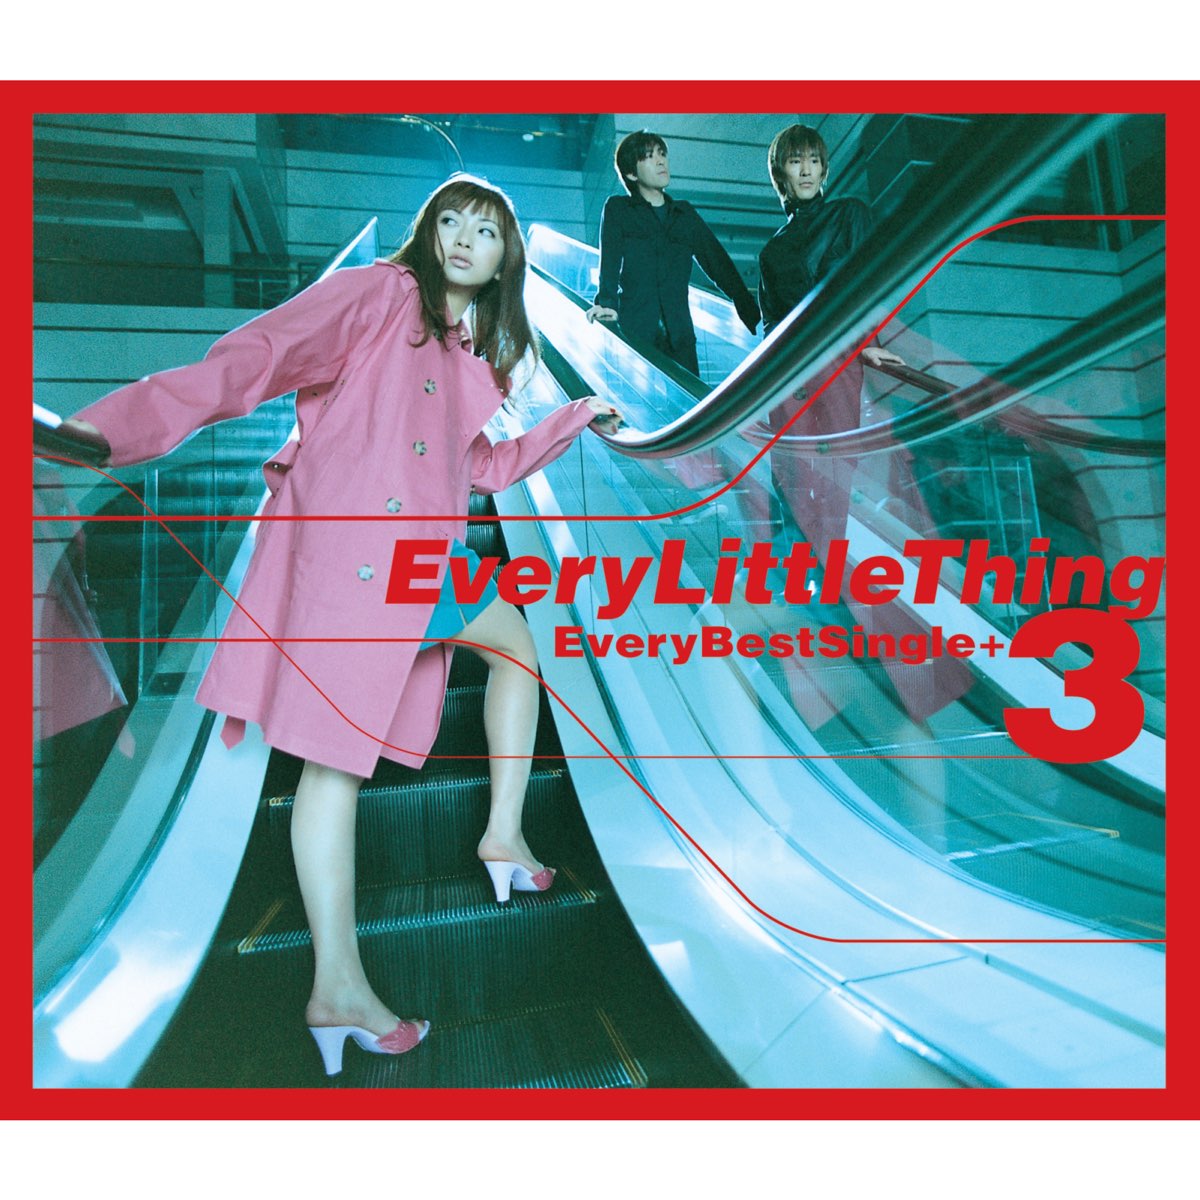 Every Best Single+3 - Album by Every Little Thing - Apple Music